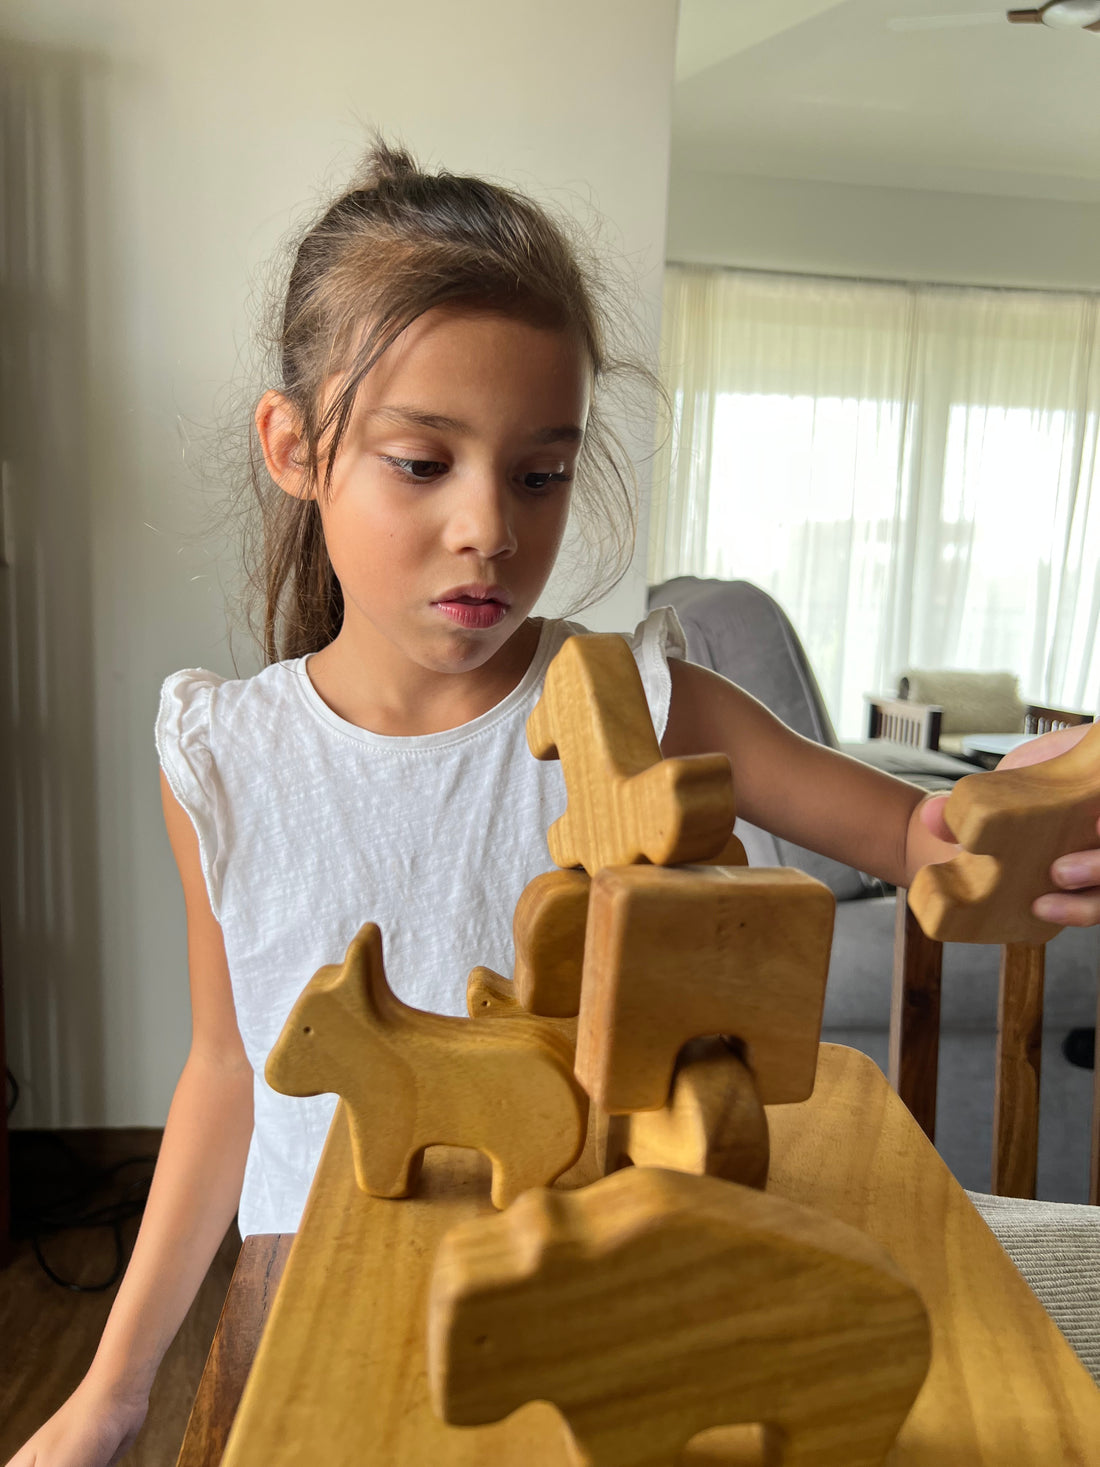 Meeting Global Standards: The Safety of Our Wooden Toys